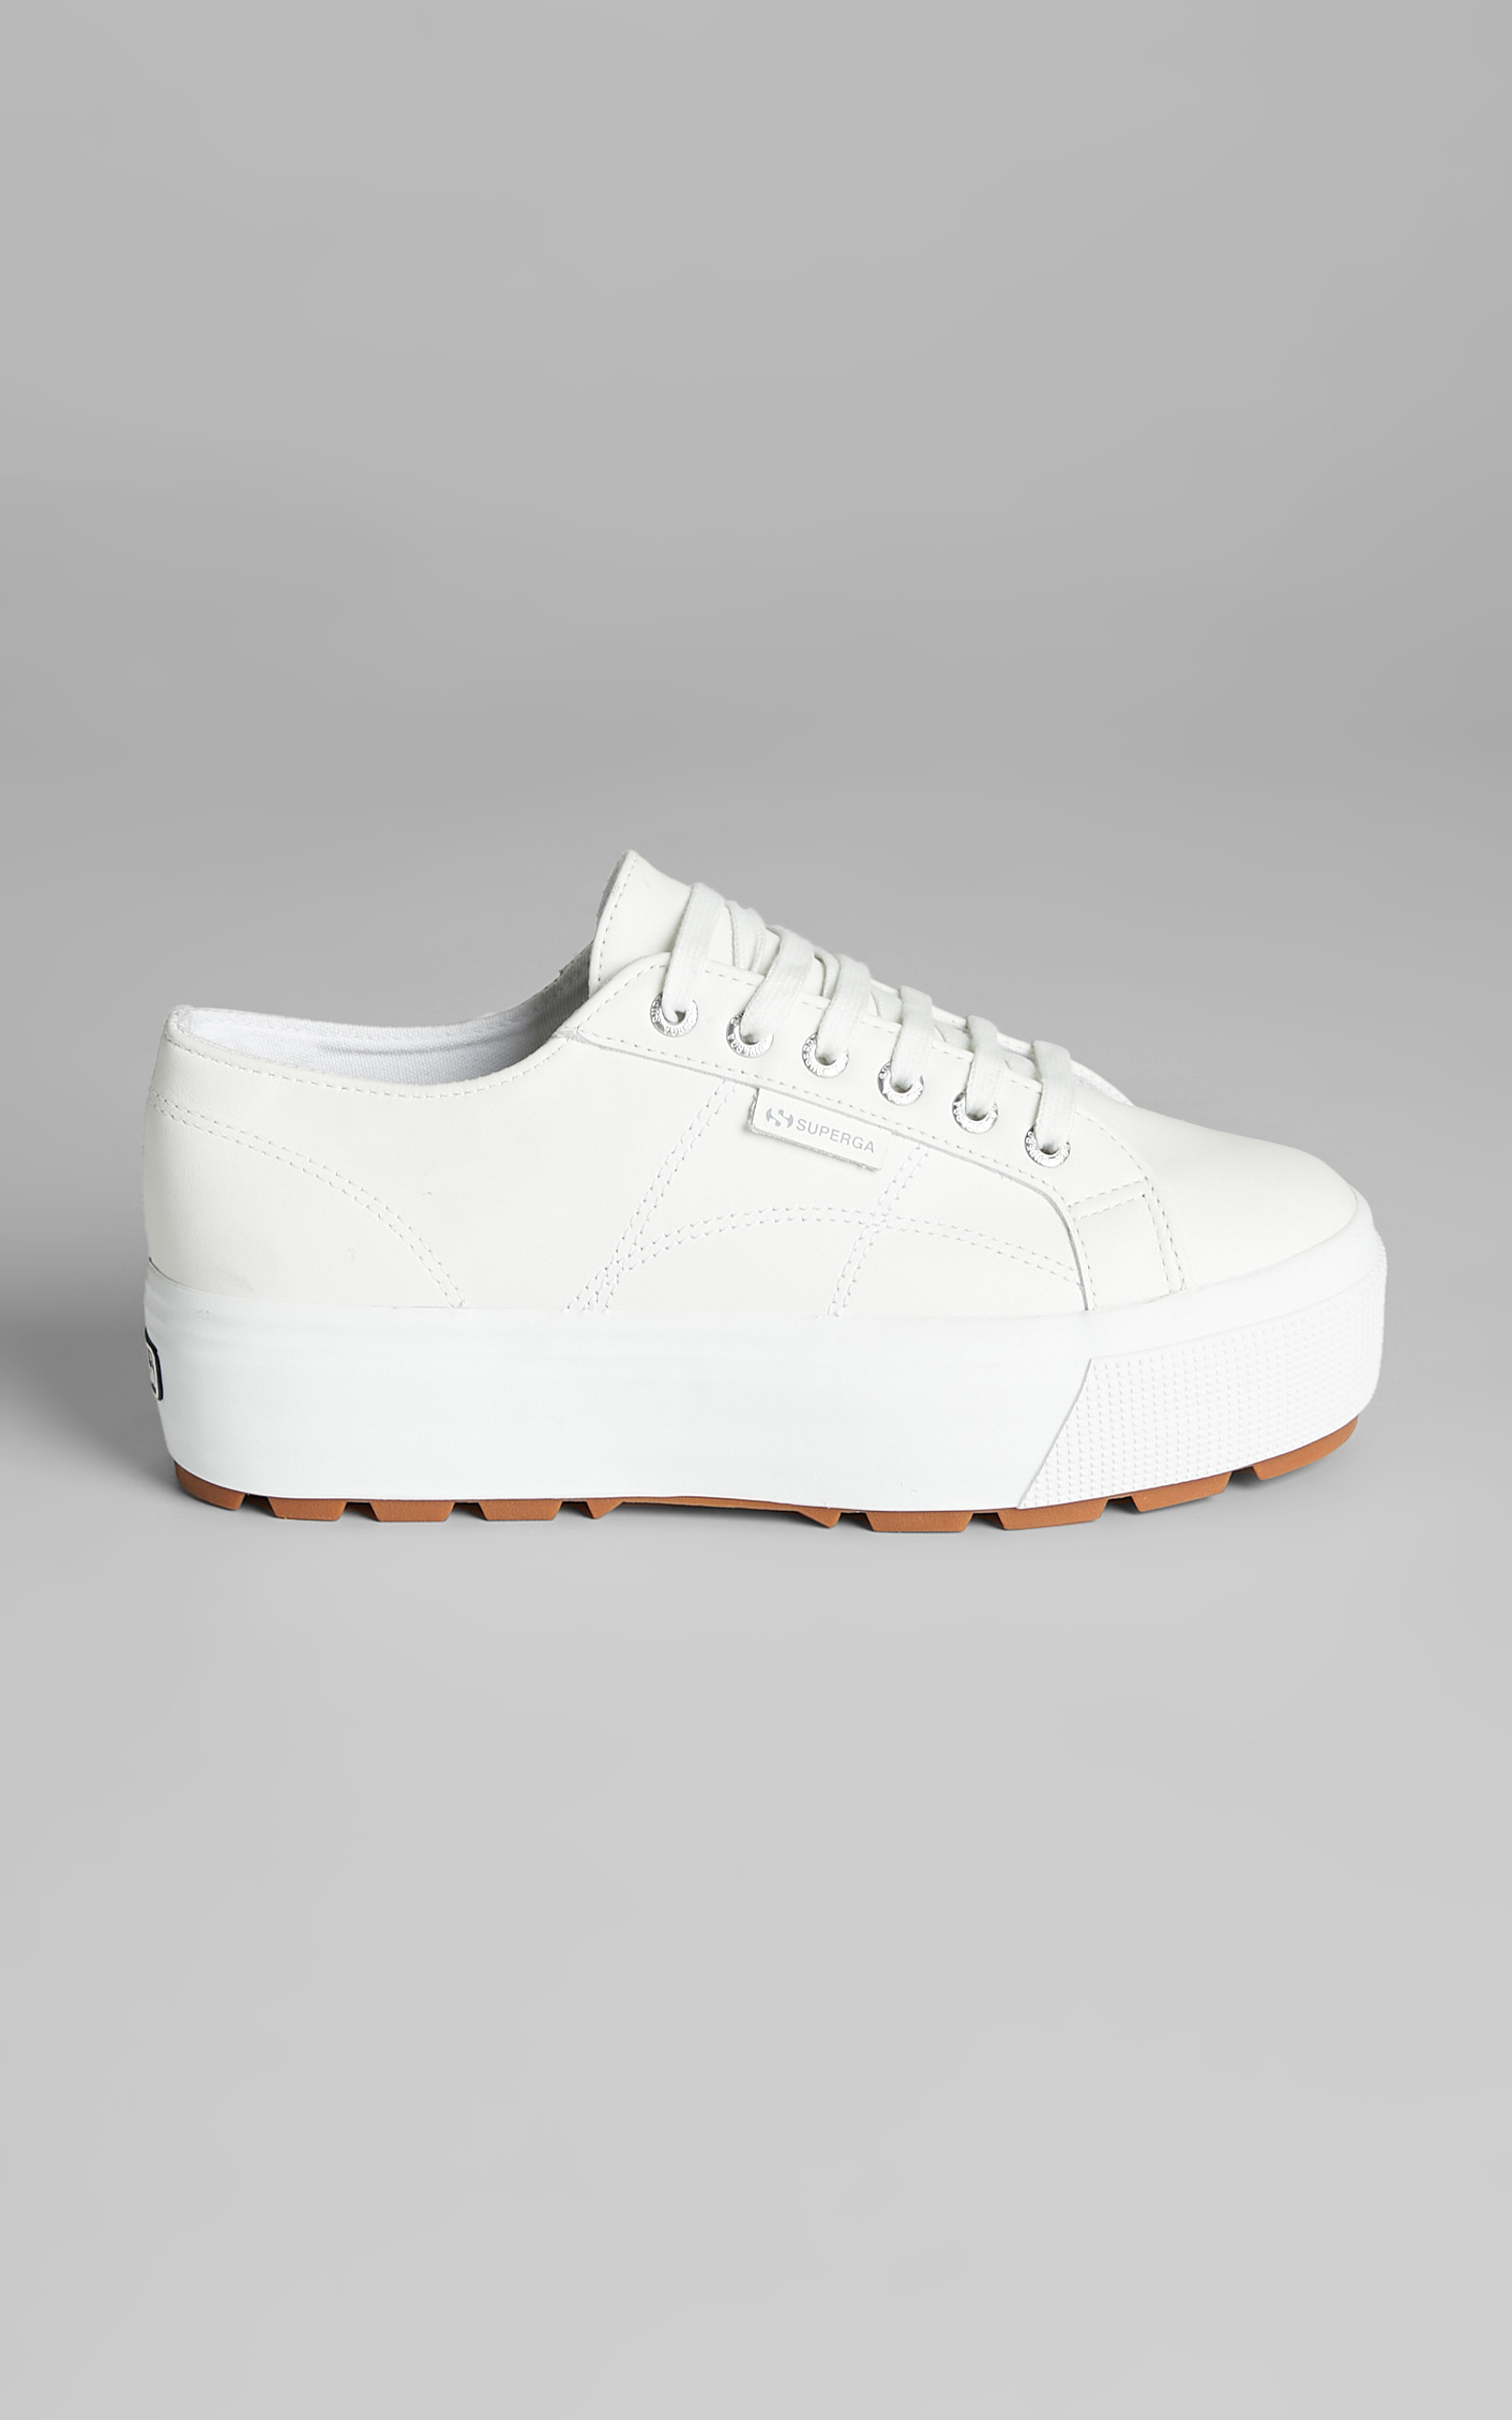 Superga - 2790 Tank Nappa Sneakers in 900 White - 05, WHT1, hi-res image number null